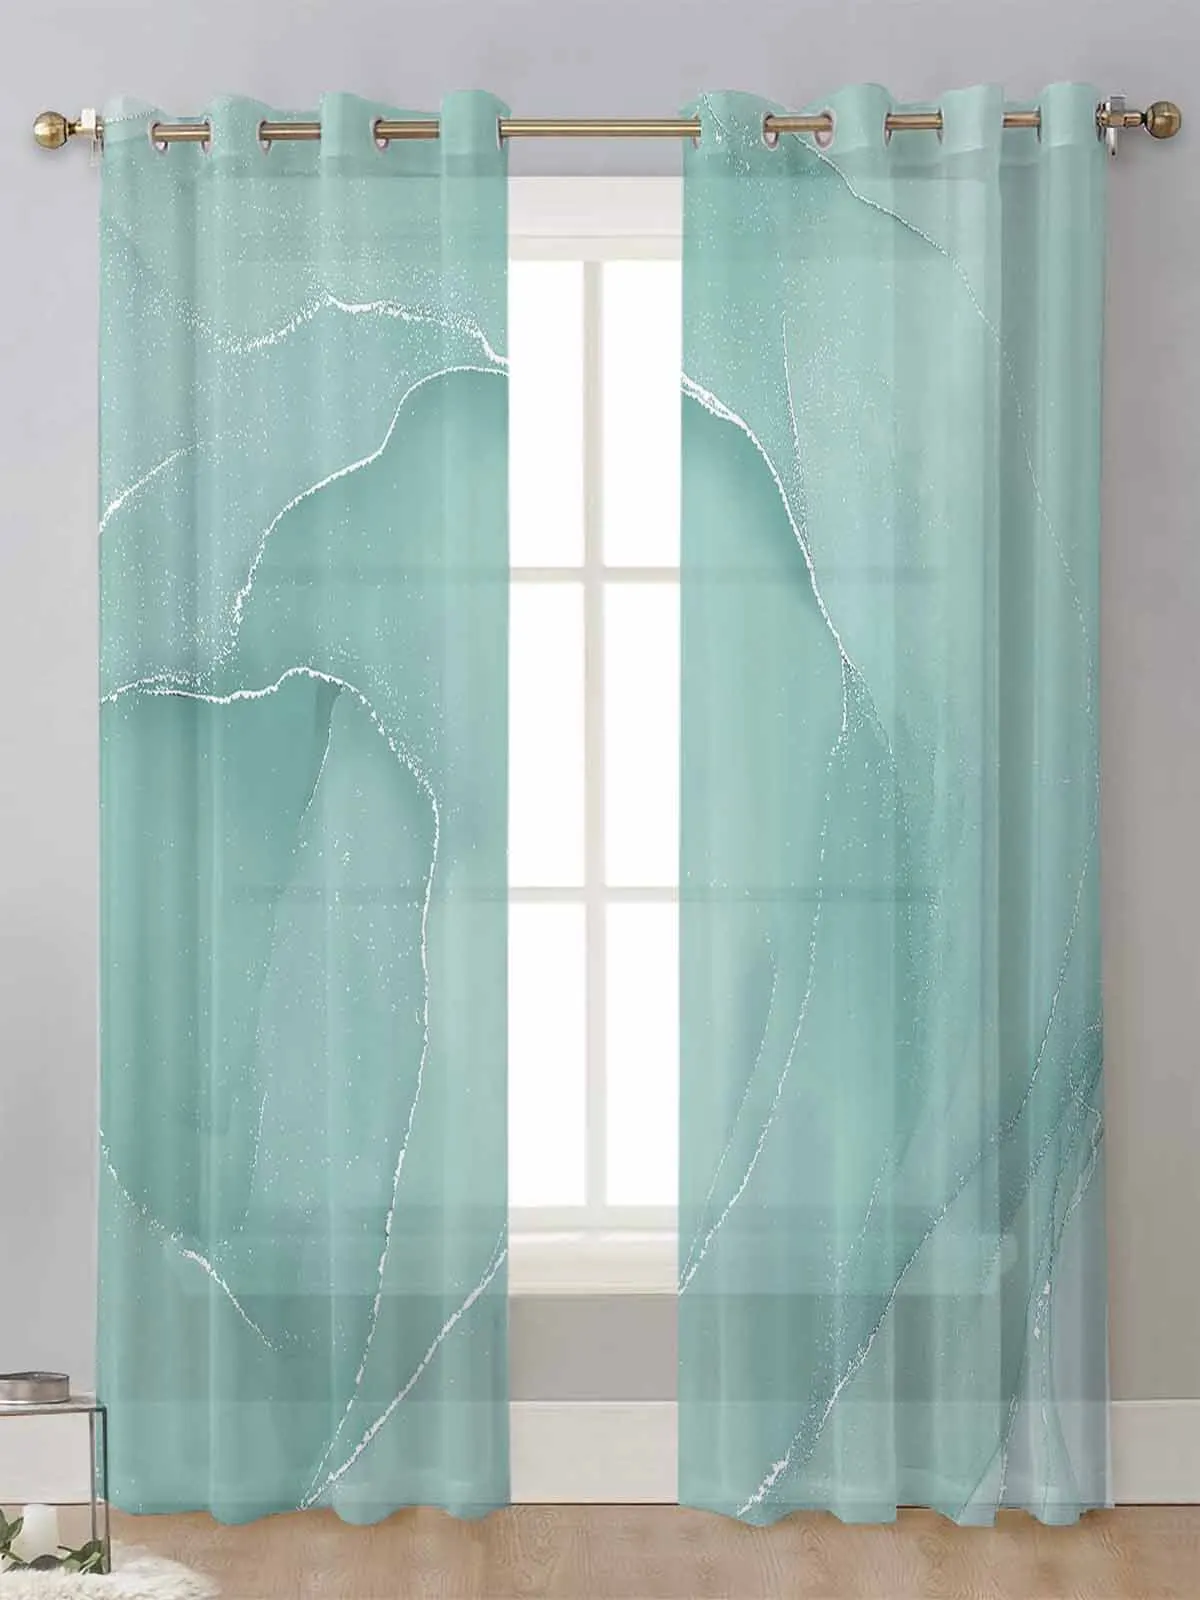 

Marble Aqua Green Sheer Curtains For Living Room Window Screening Transparent Voile Tulle Curtain Cortinas Drapes Home Decor